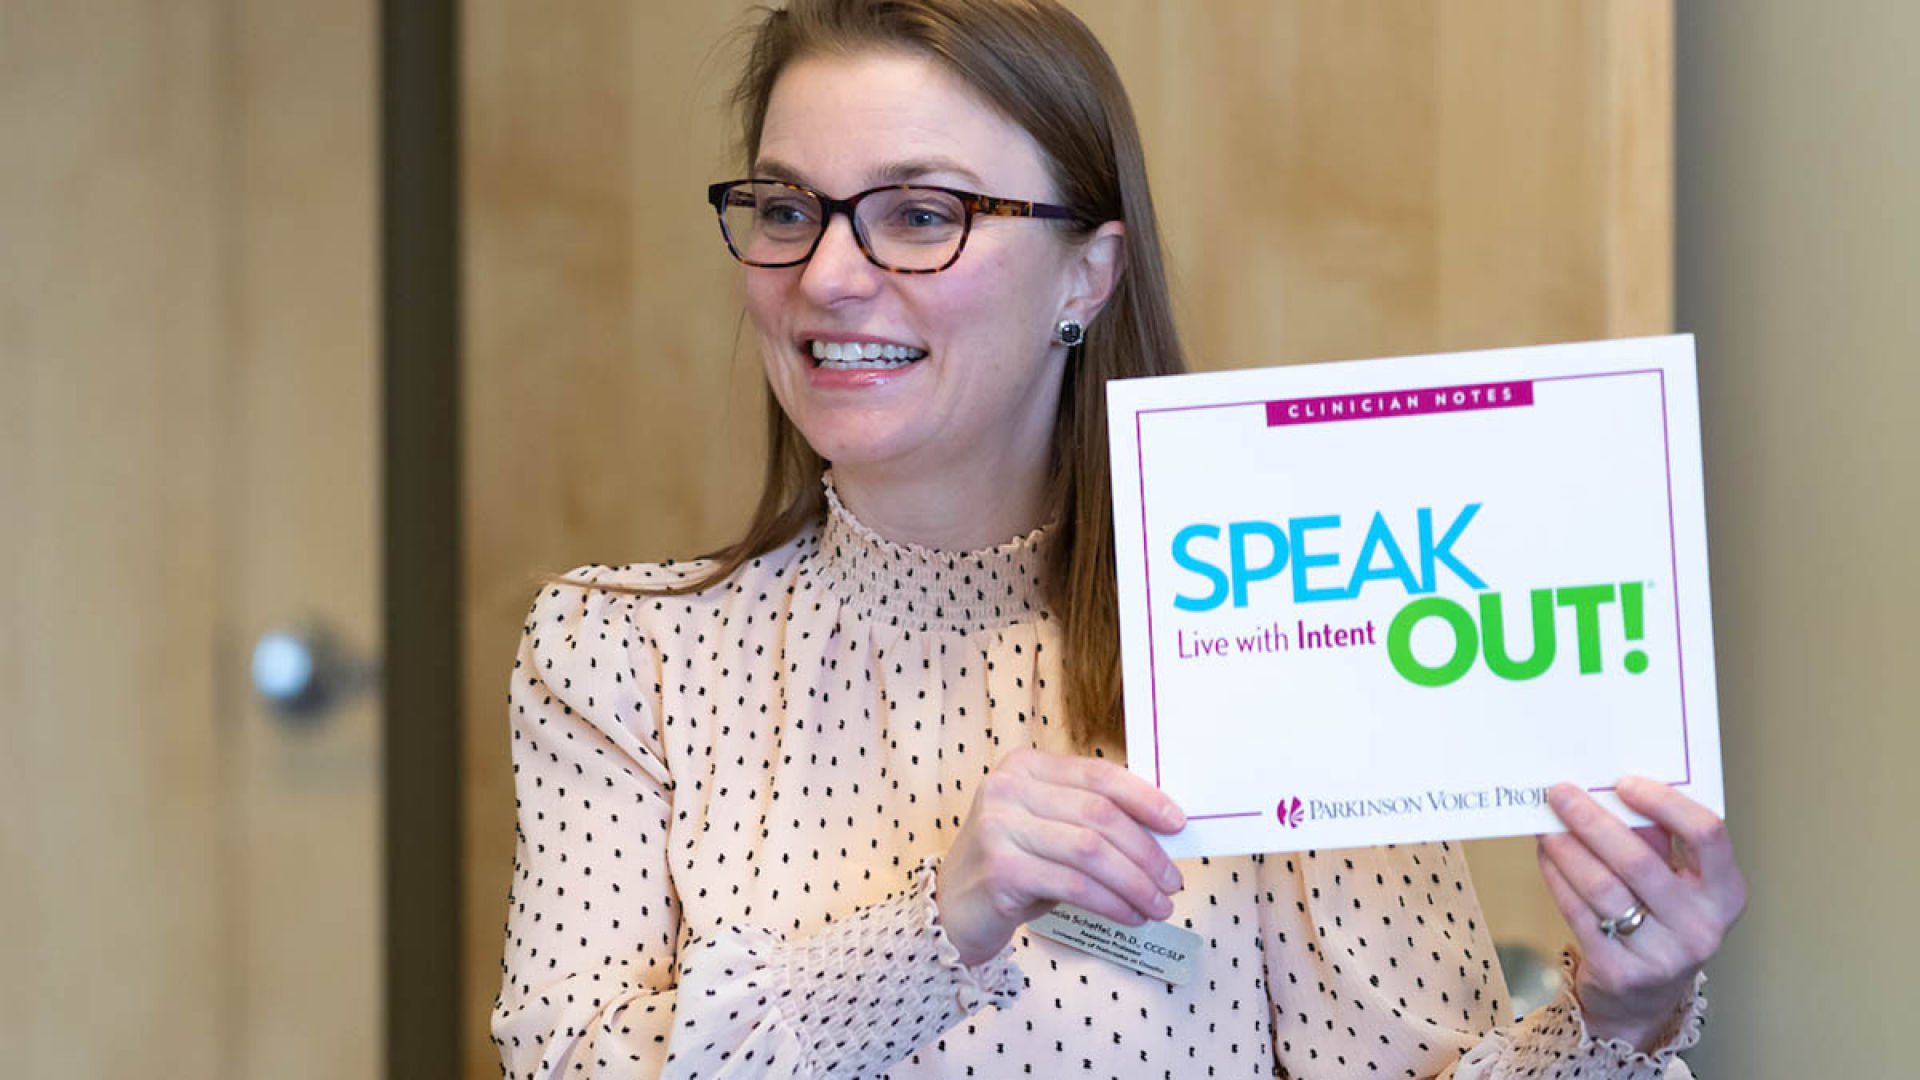 Parkinson Voice Project Supports Education and Therapy in Speech-Language Clinic